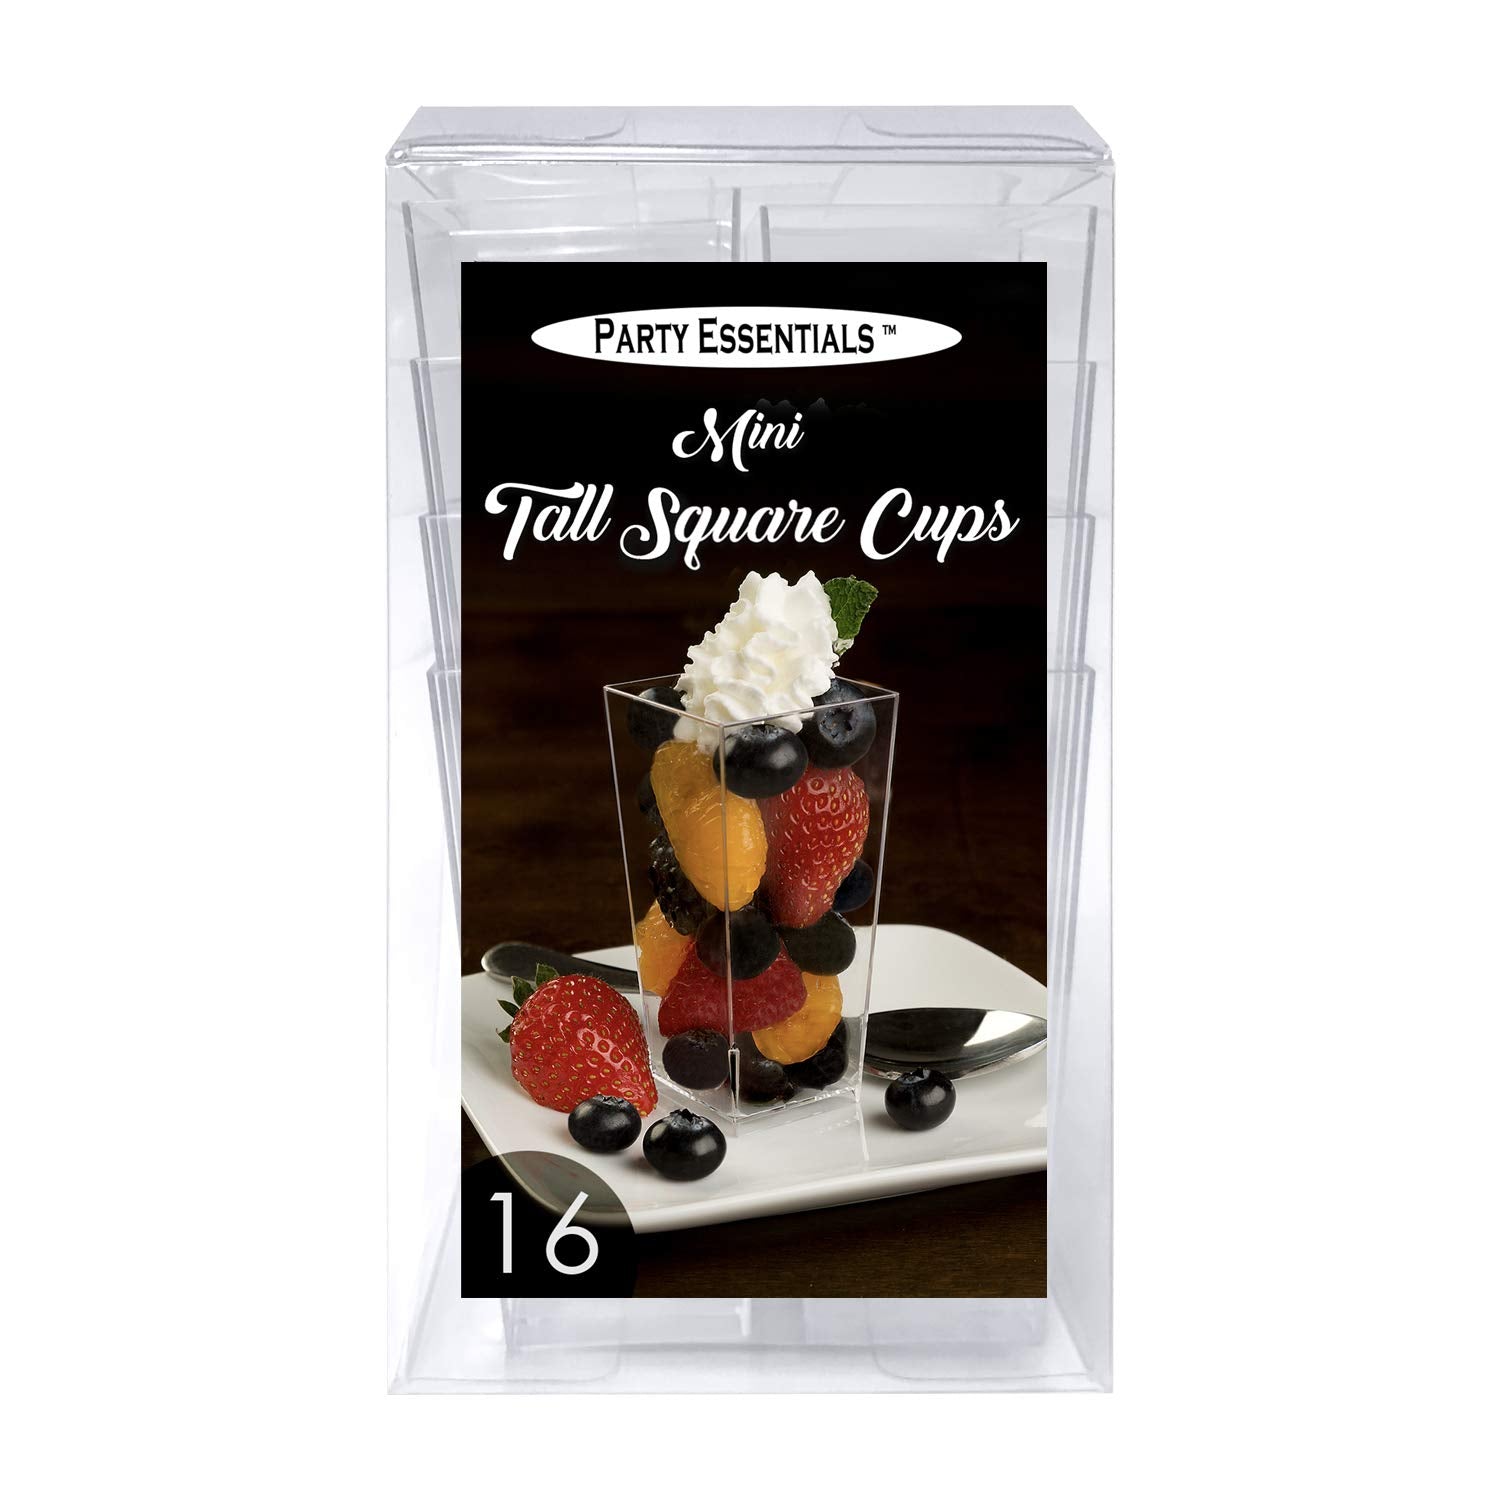 3.5oz Tall Square Cups 16ct Party Essentials